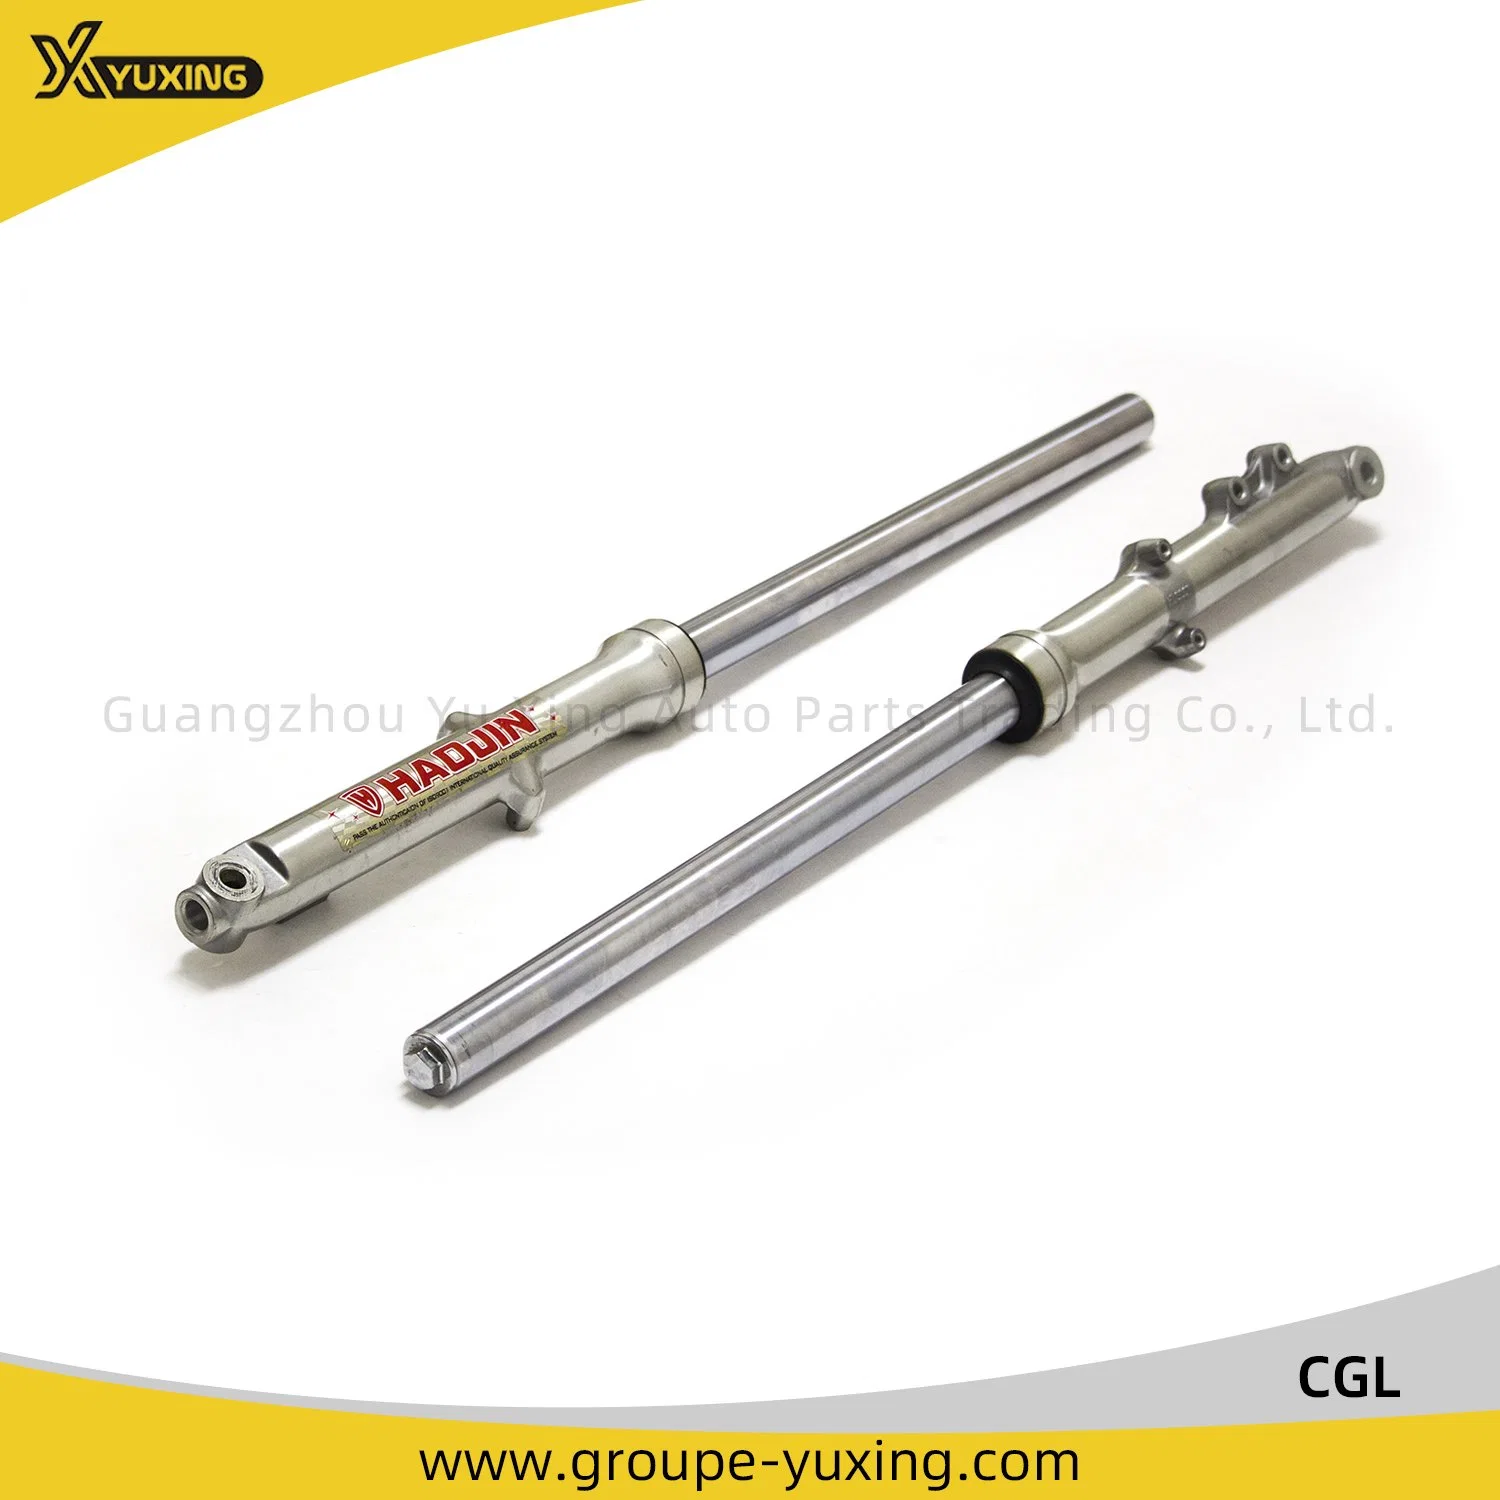 Cgl Motorcycle Parts Motorcycle Front Shock Absorber